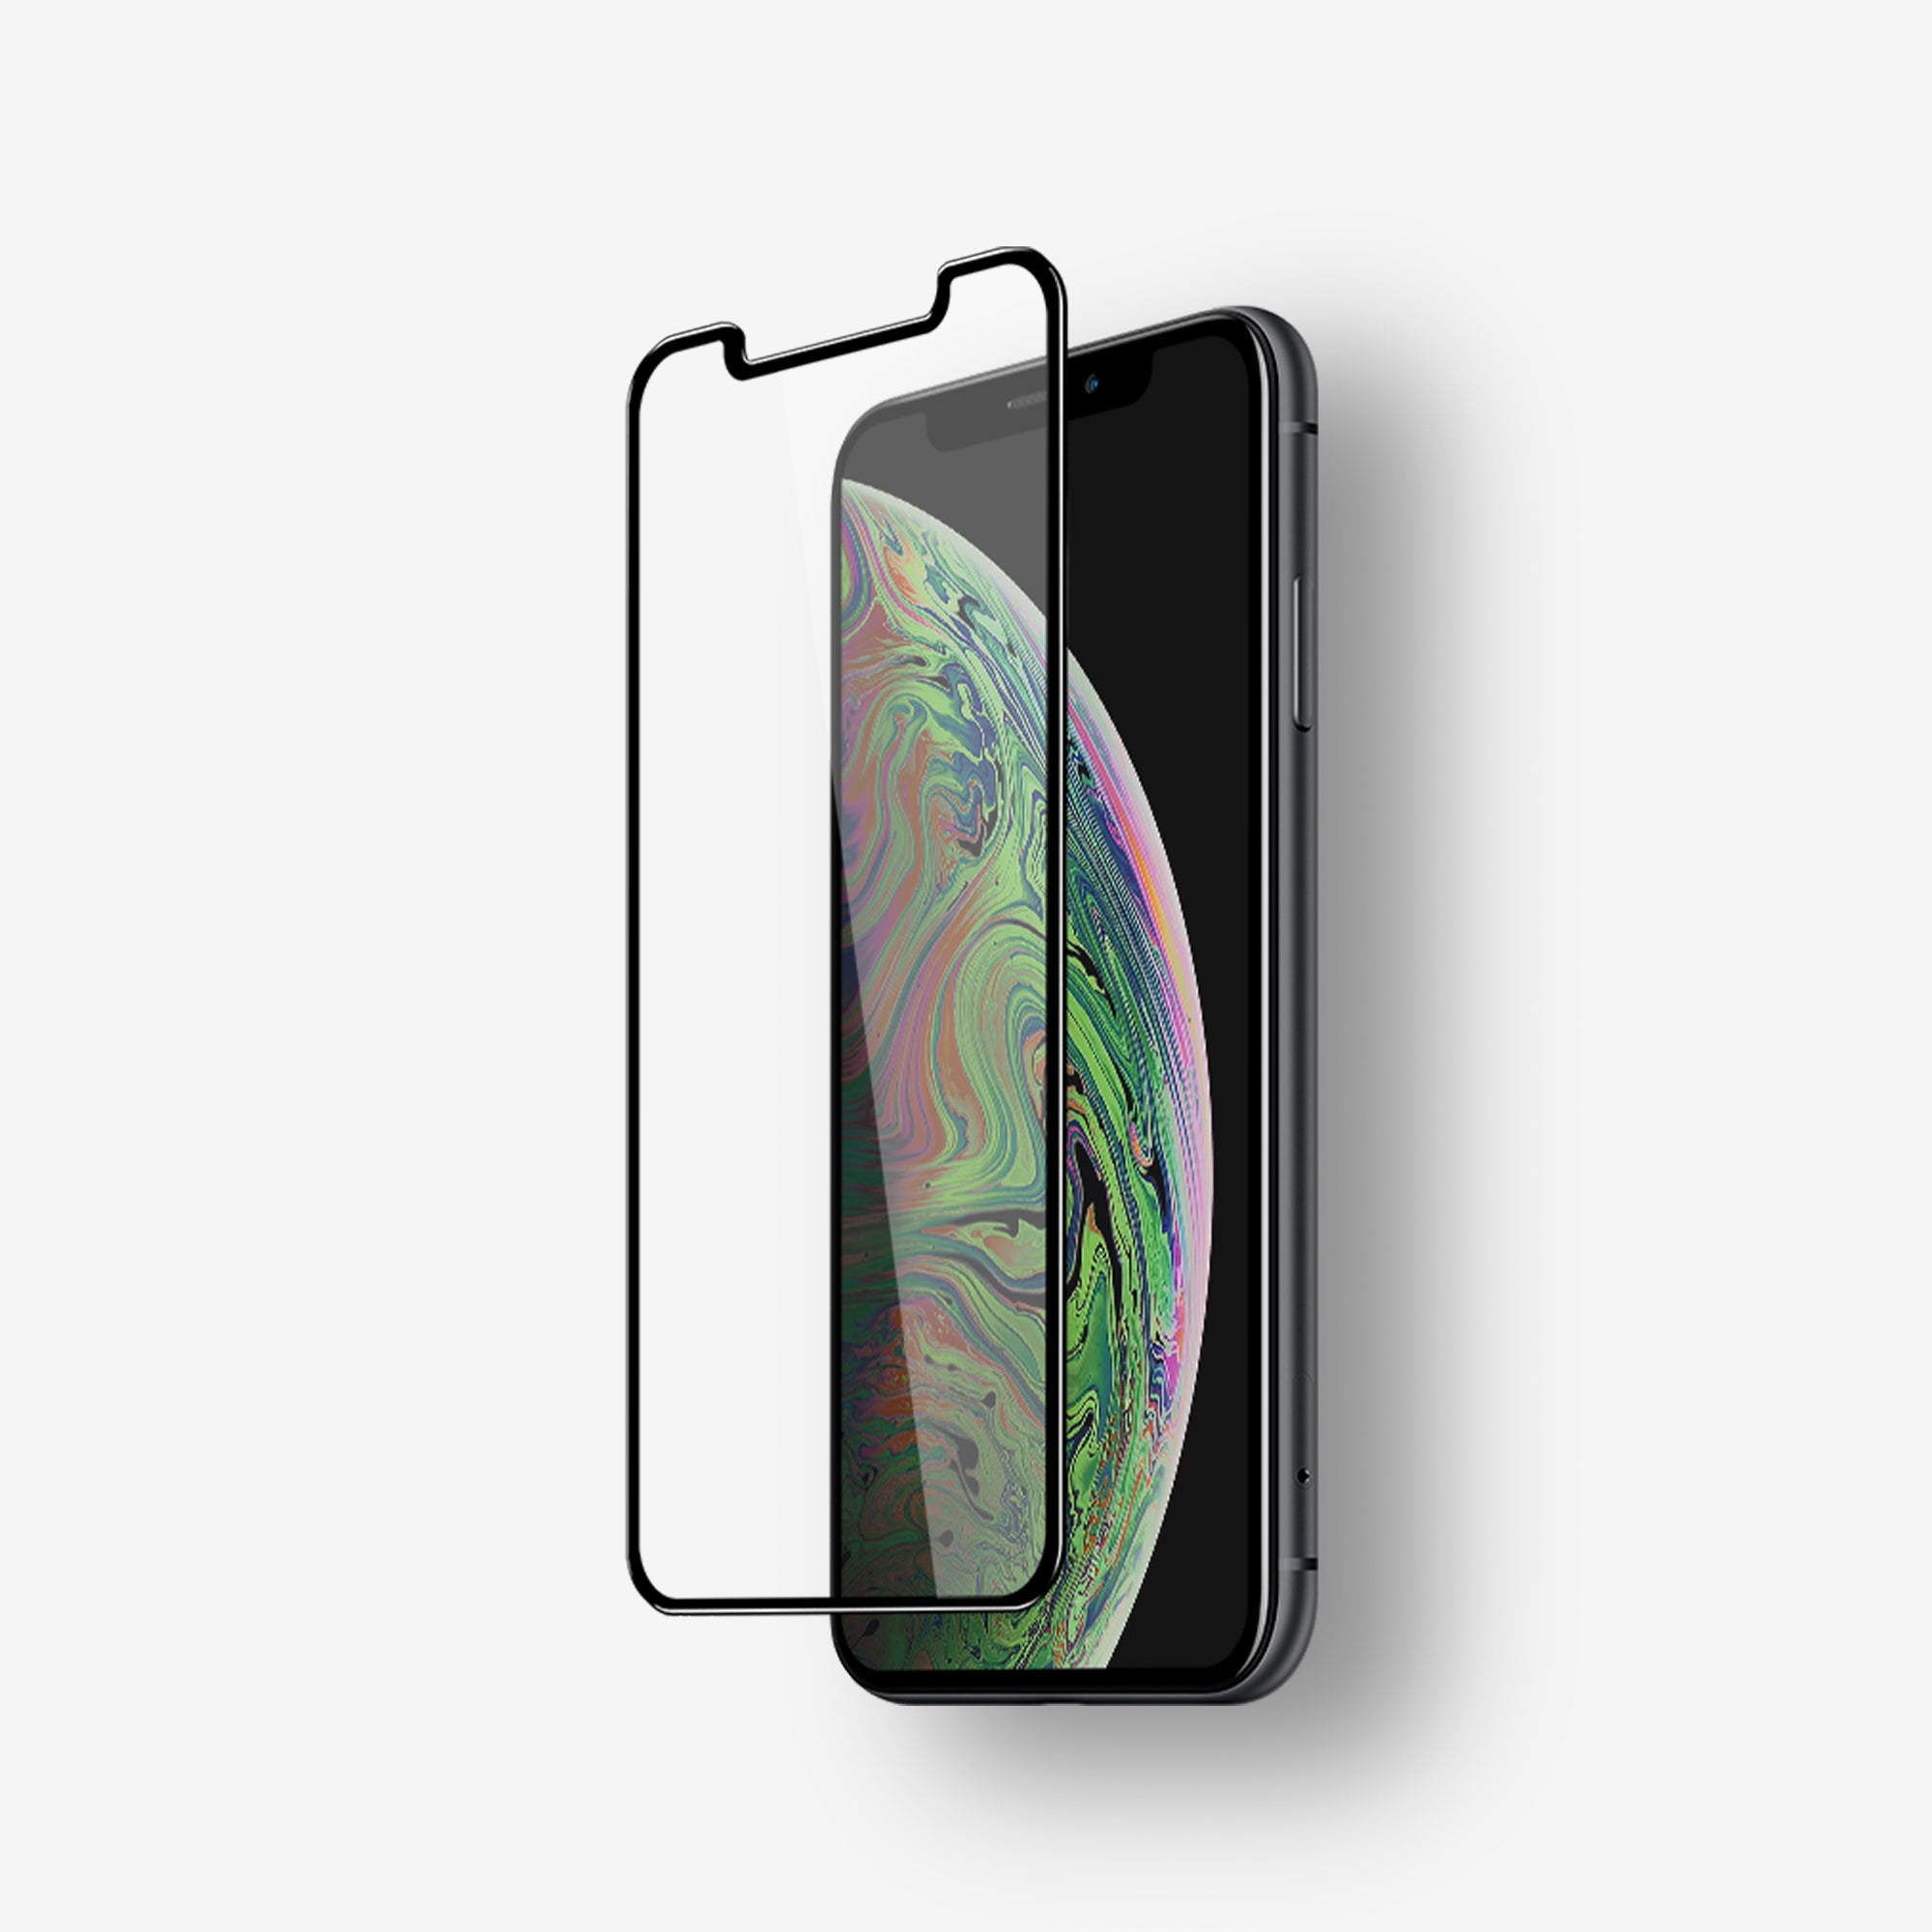 Tempered Glass Screen Protector COOL for iPhone X / iPhone XS